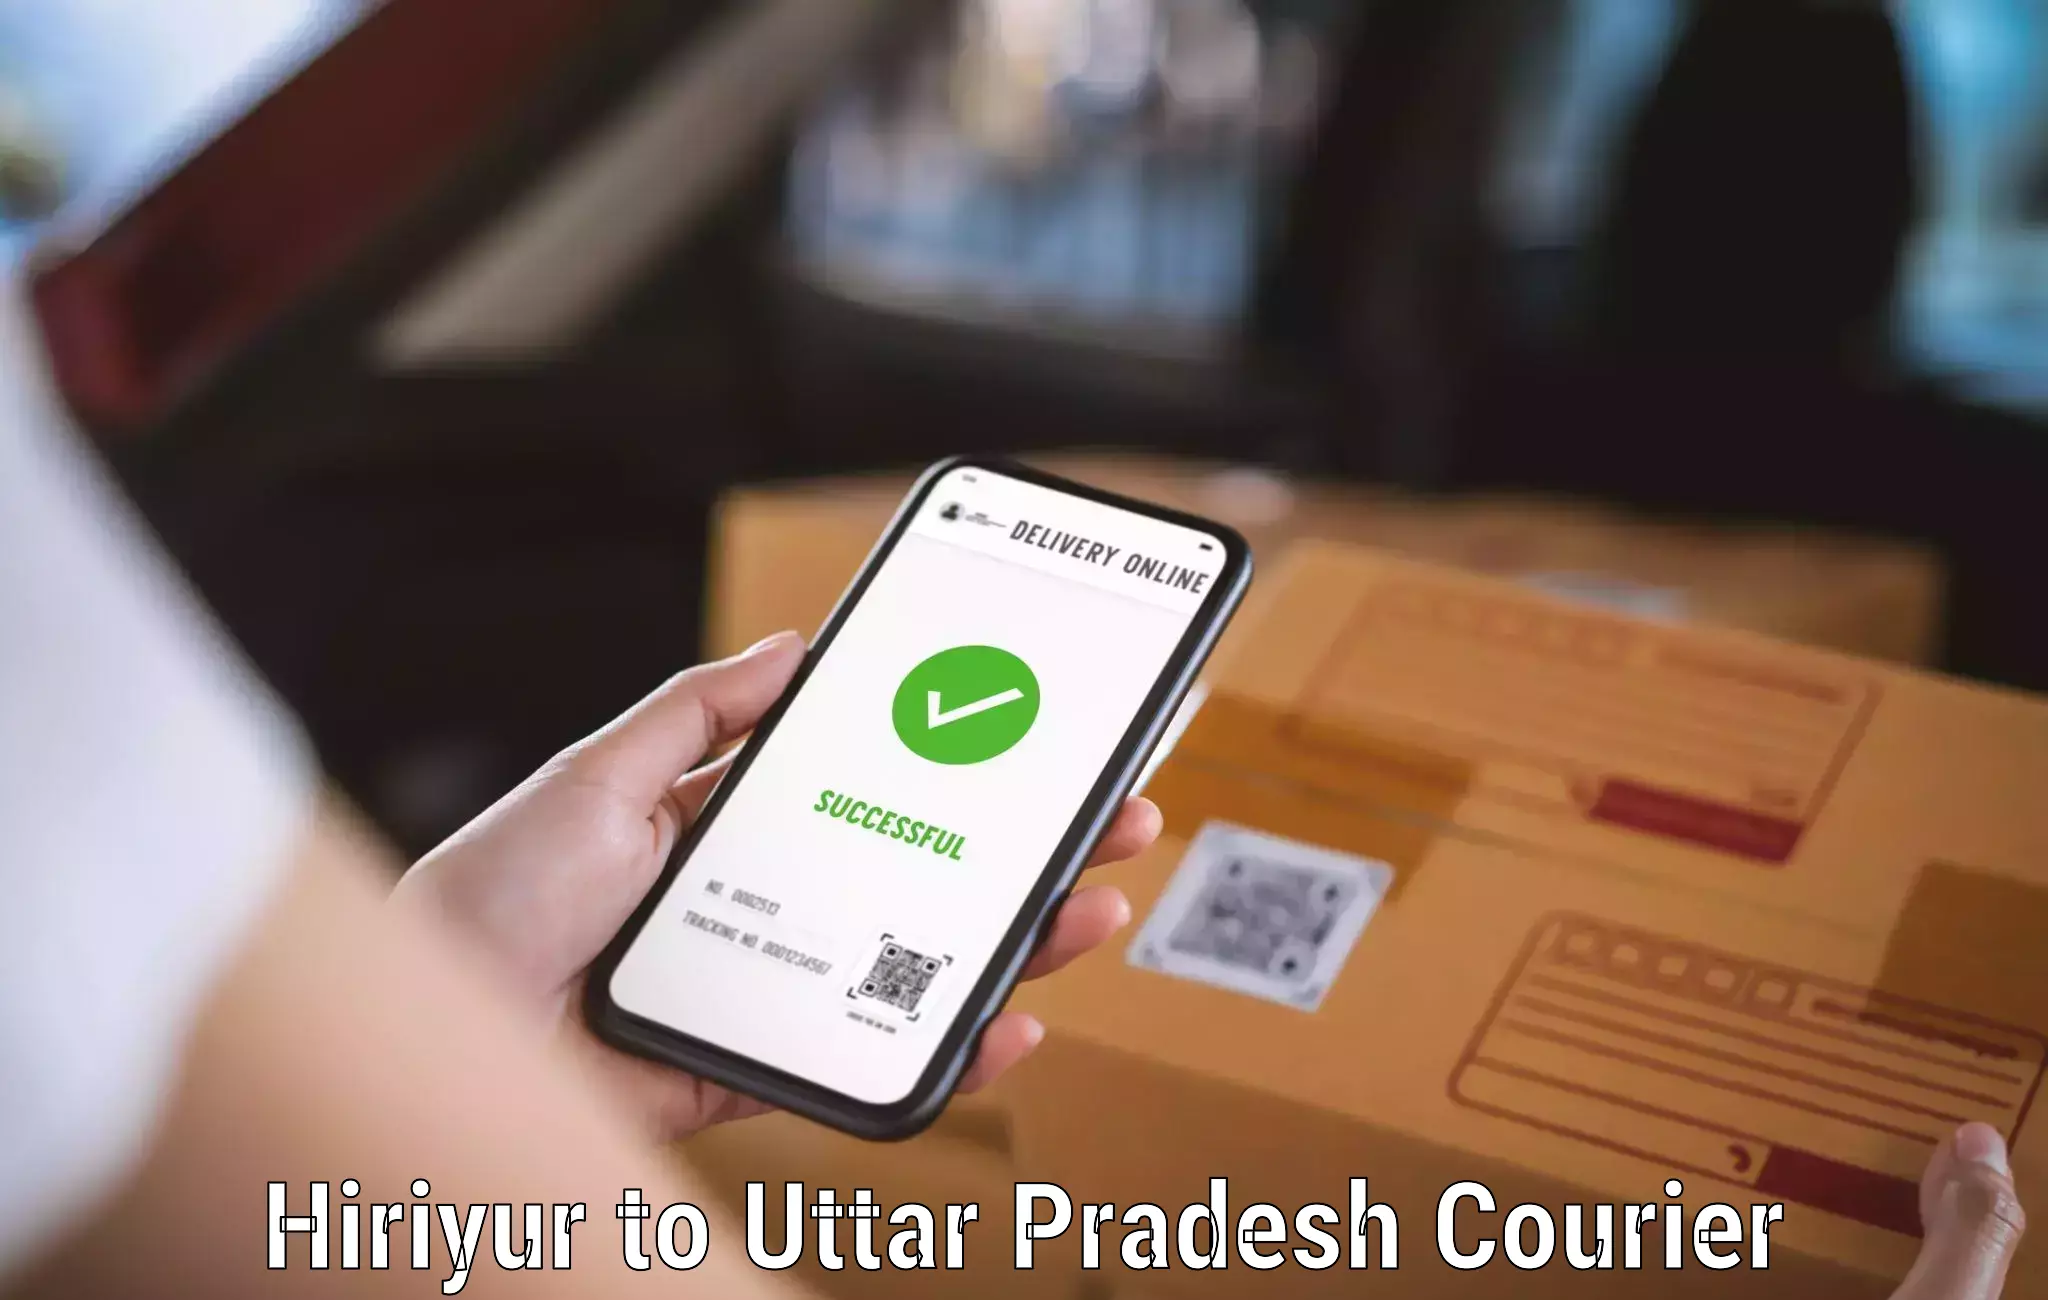 Courier service innovation Hiriyur to Kanpur